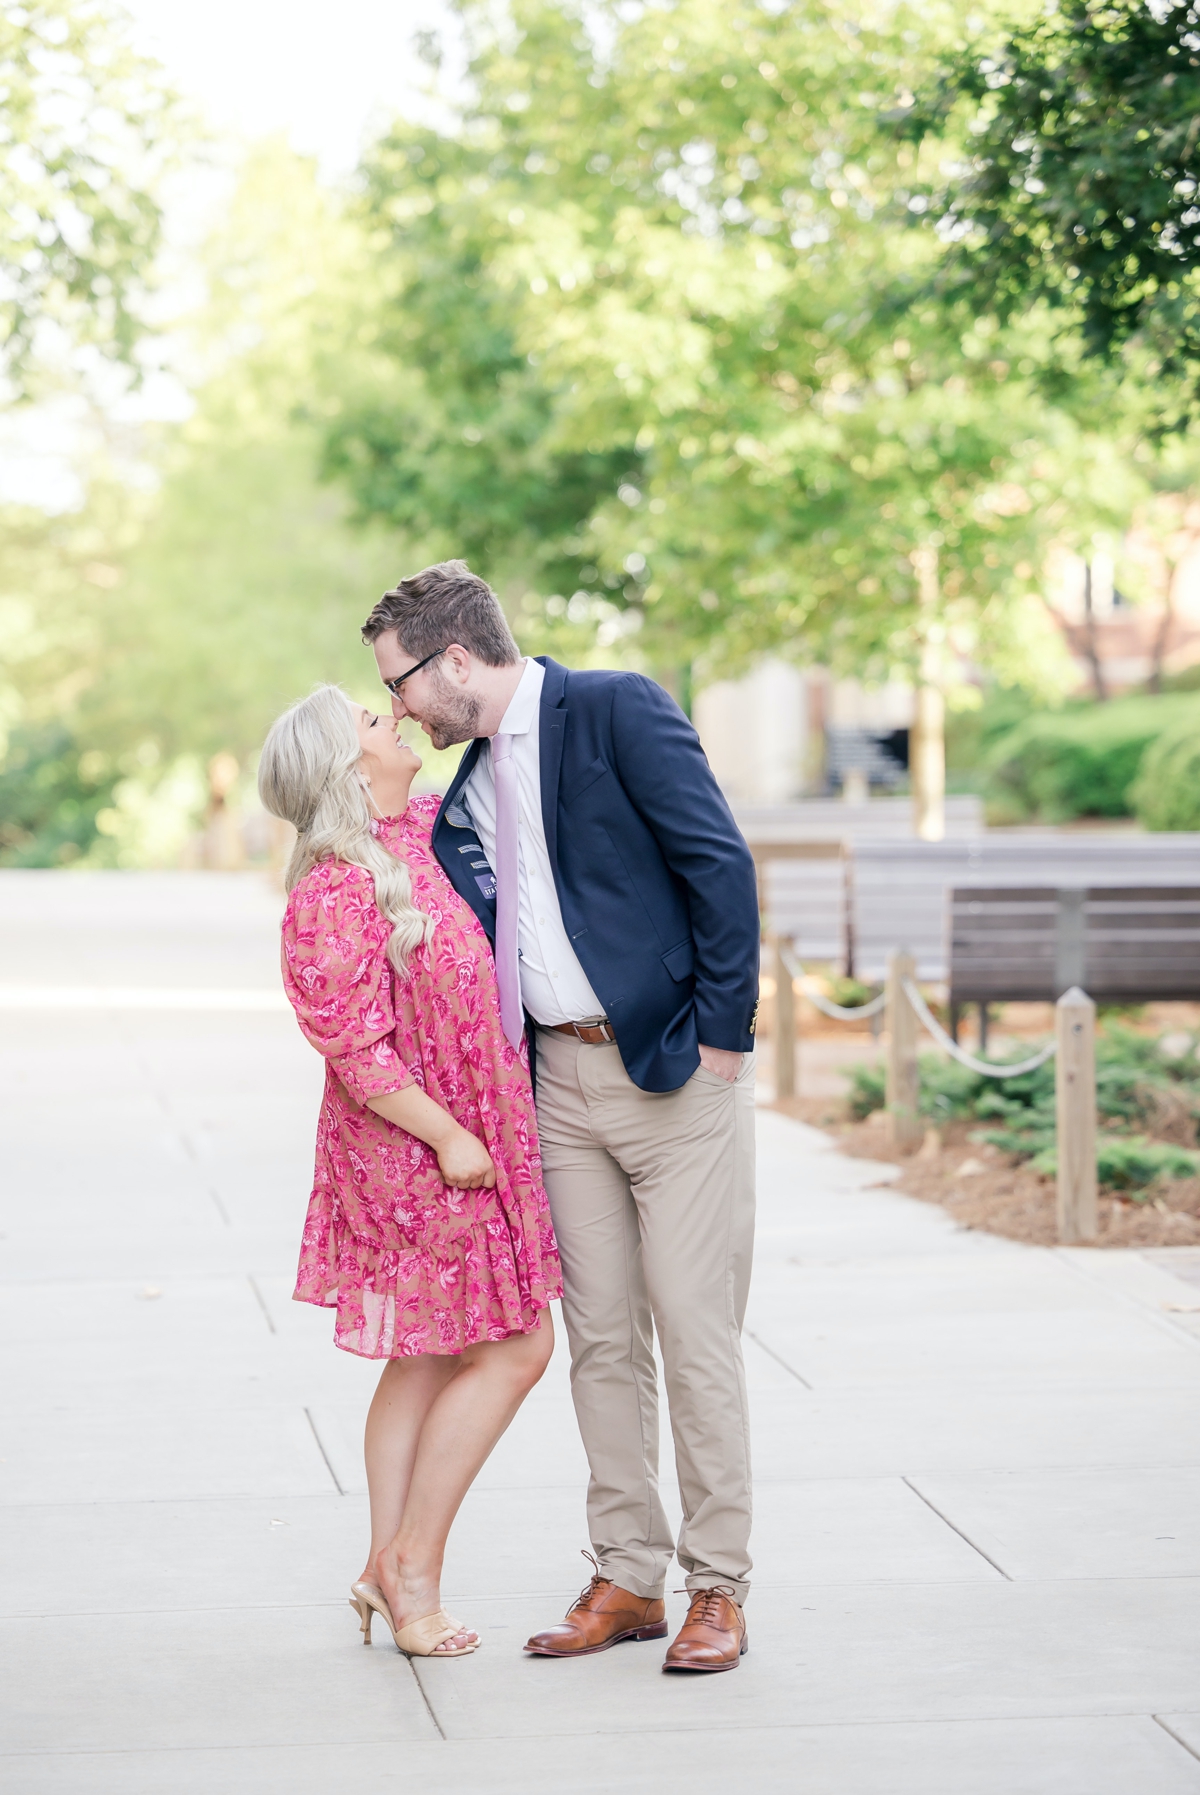 Austin and Sydney kissing during their engagement session.